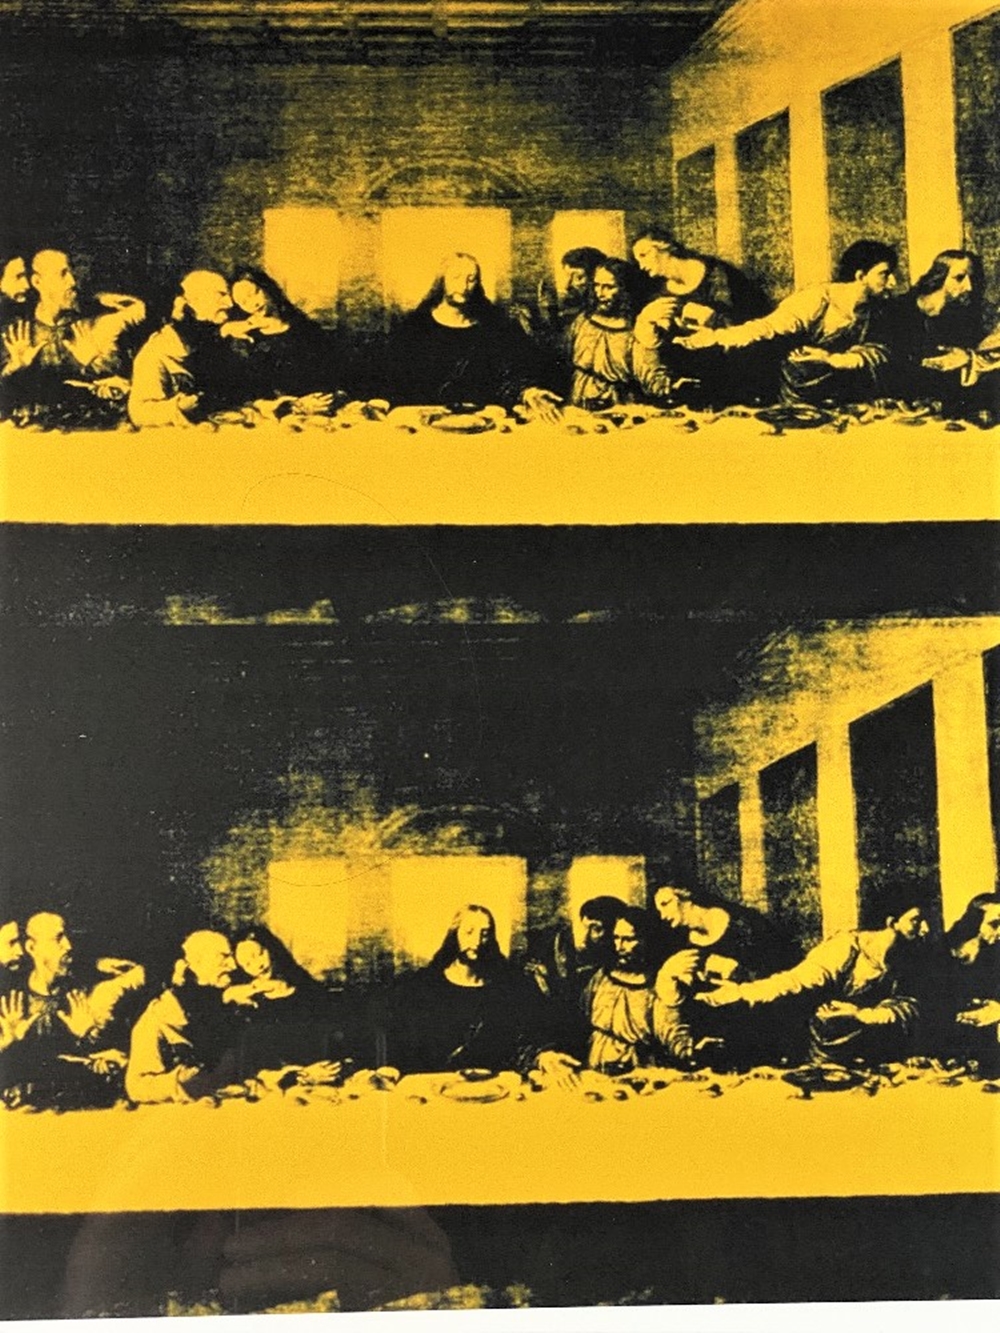 Andy Warhol &#8211; (1928-1987) &#8220;Last Supper&#8221; Numbered Lithograph - Image 3 of 8